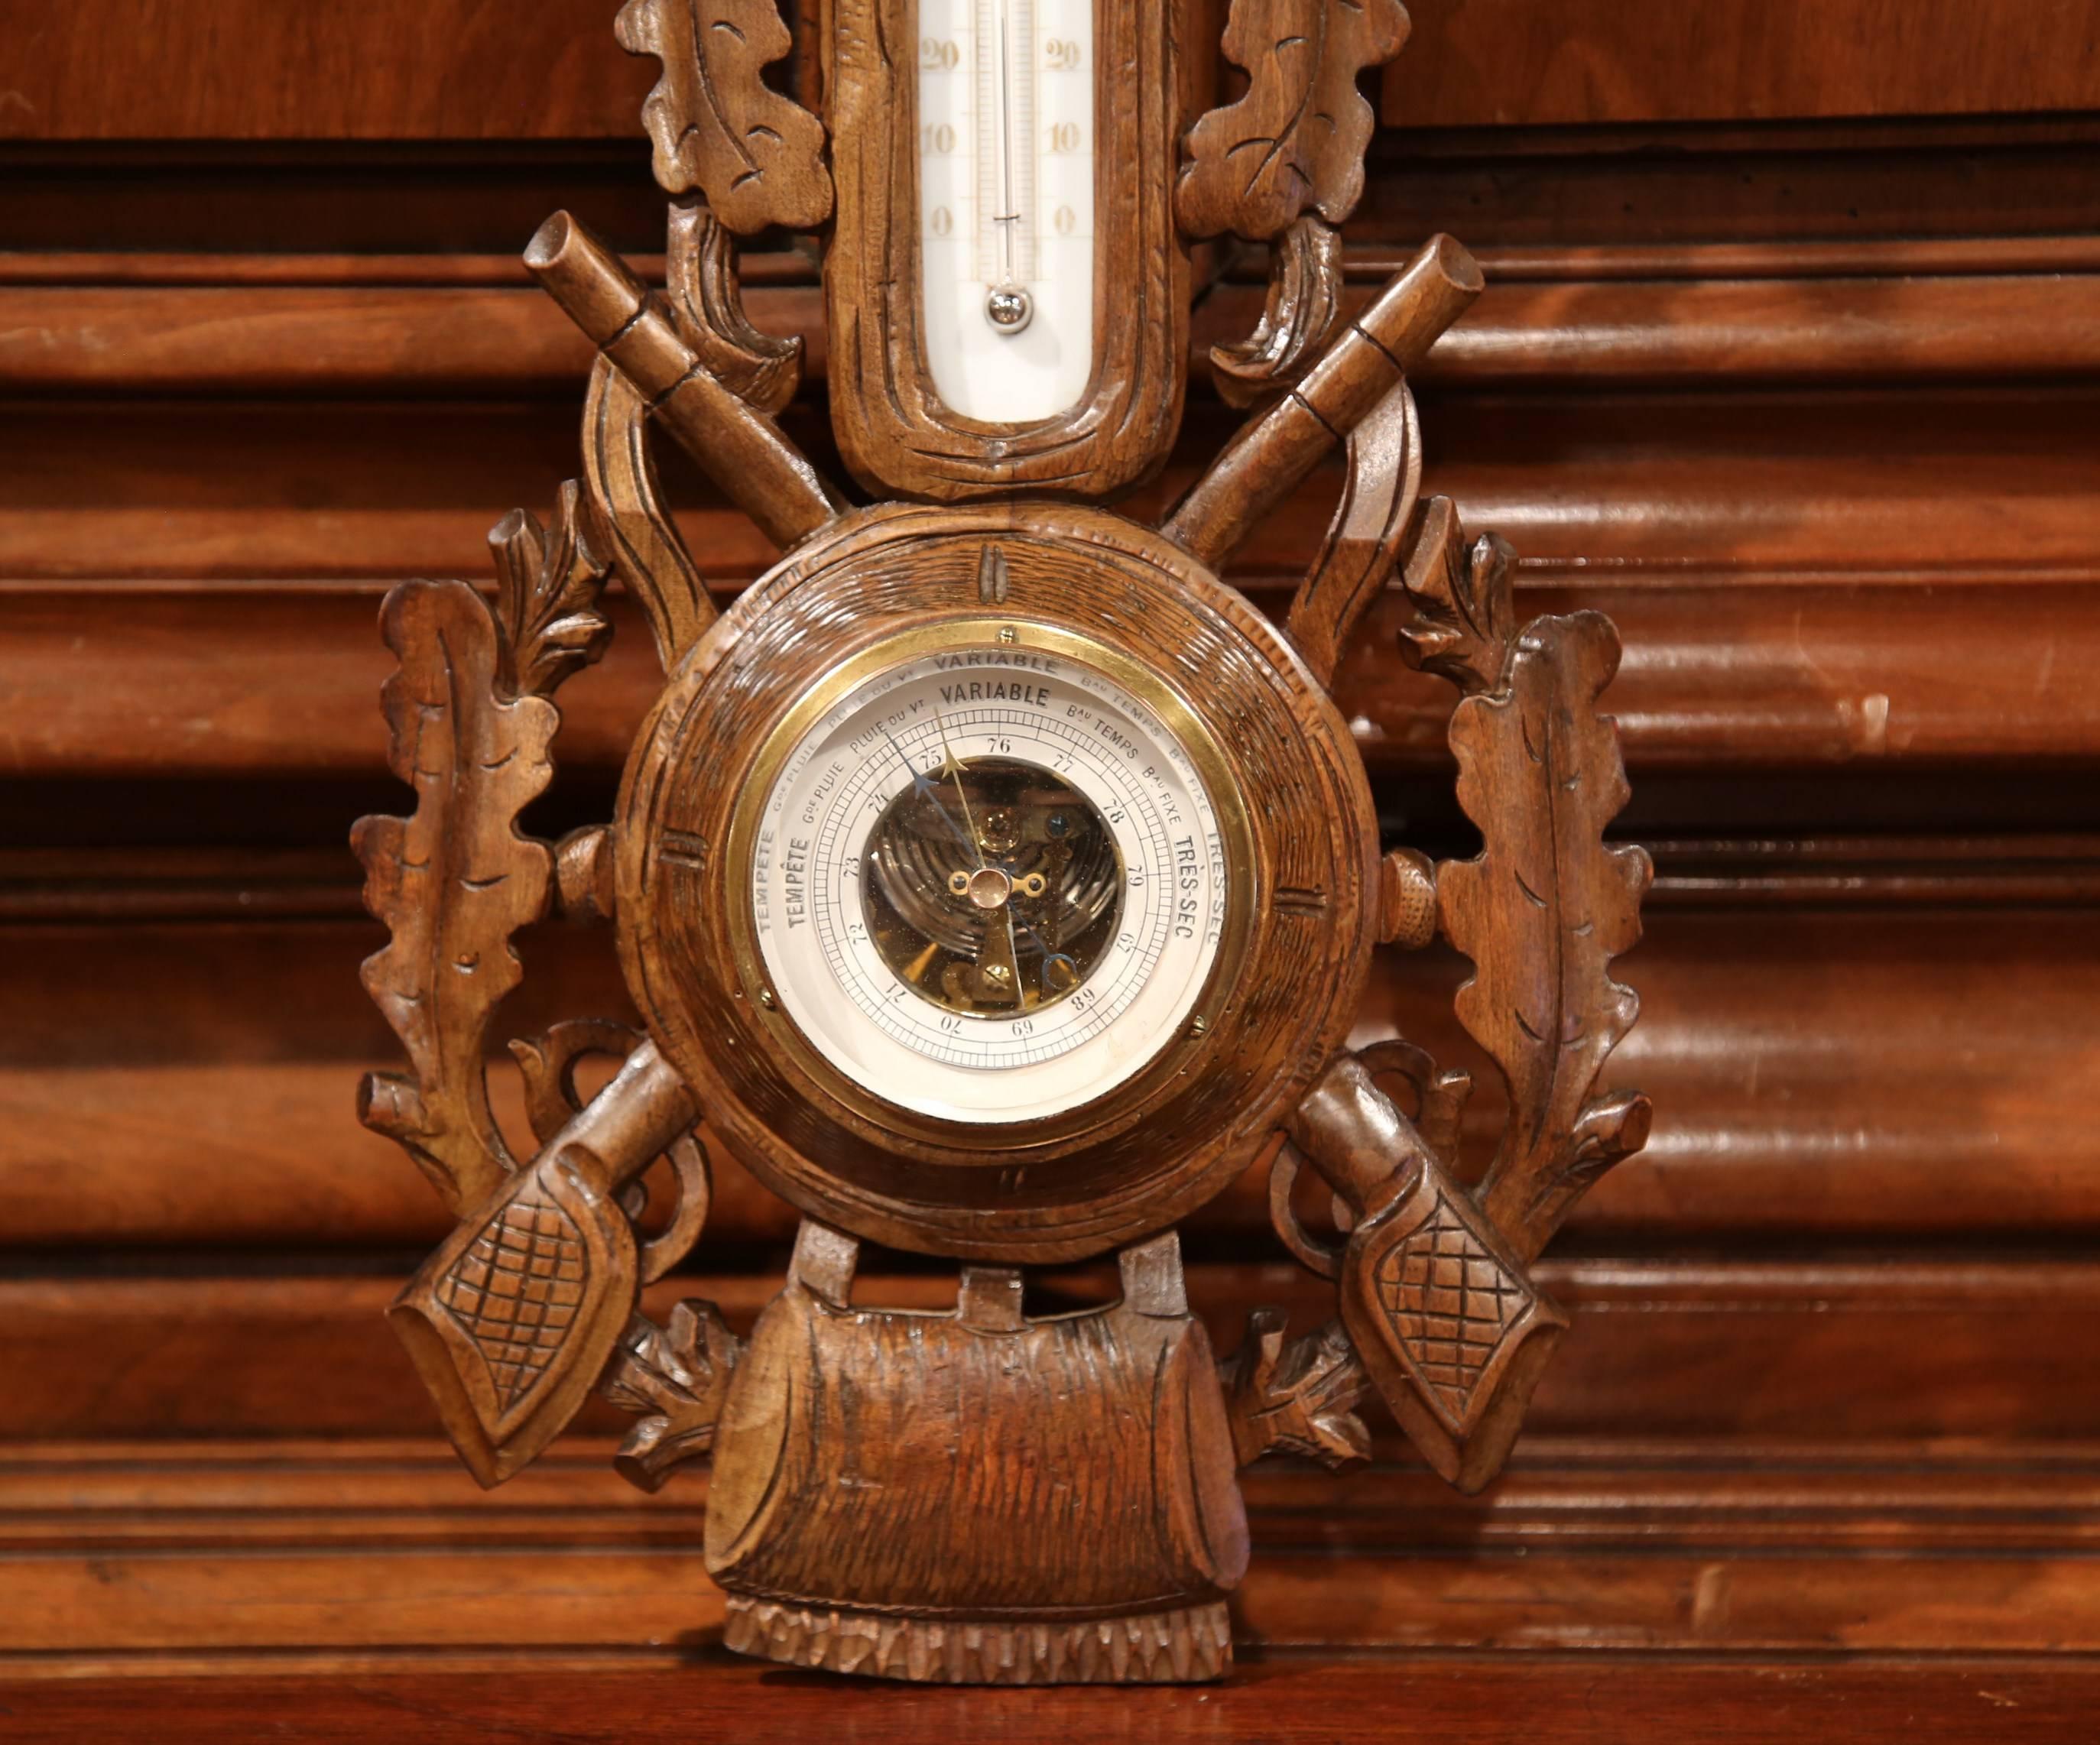 This elegant antique wall hanging barometer was crafted in France, circa 1880. The decorative weather and temperature reading device is embellished with a traditional hunting theme including a carved deer at the top, hunting guns, leaves on either